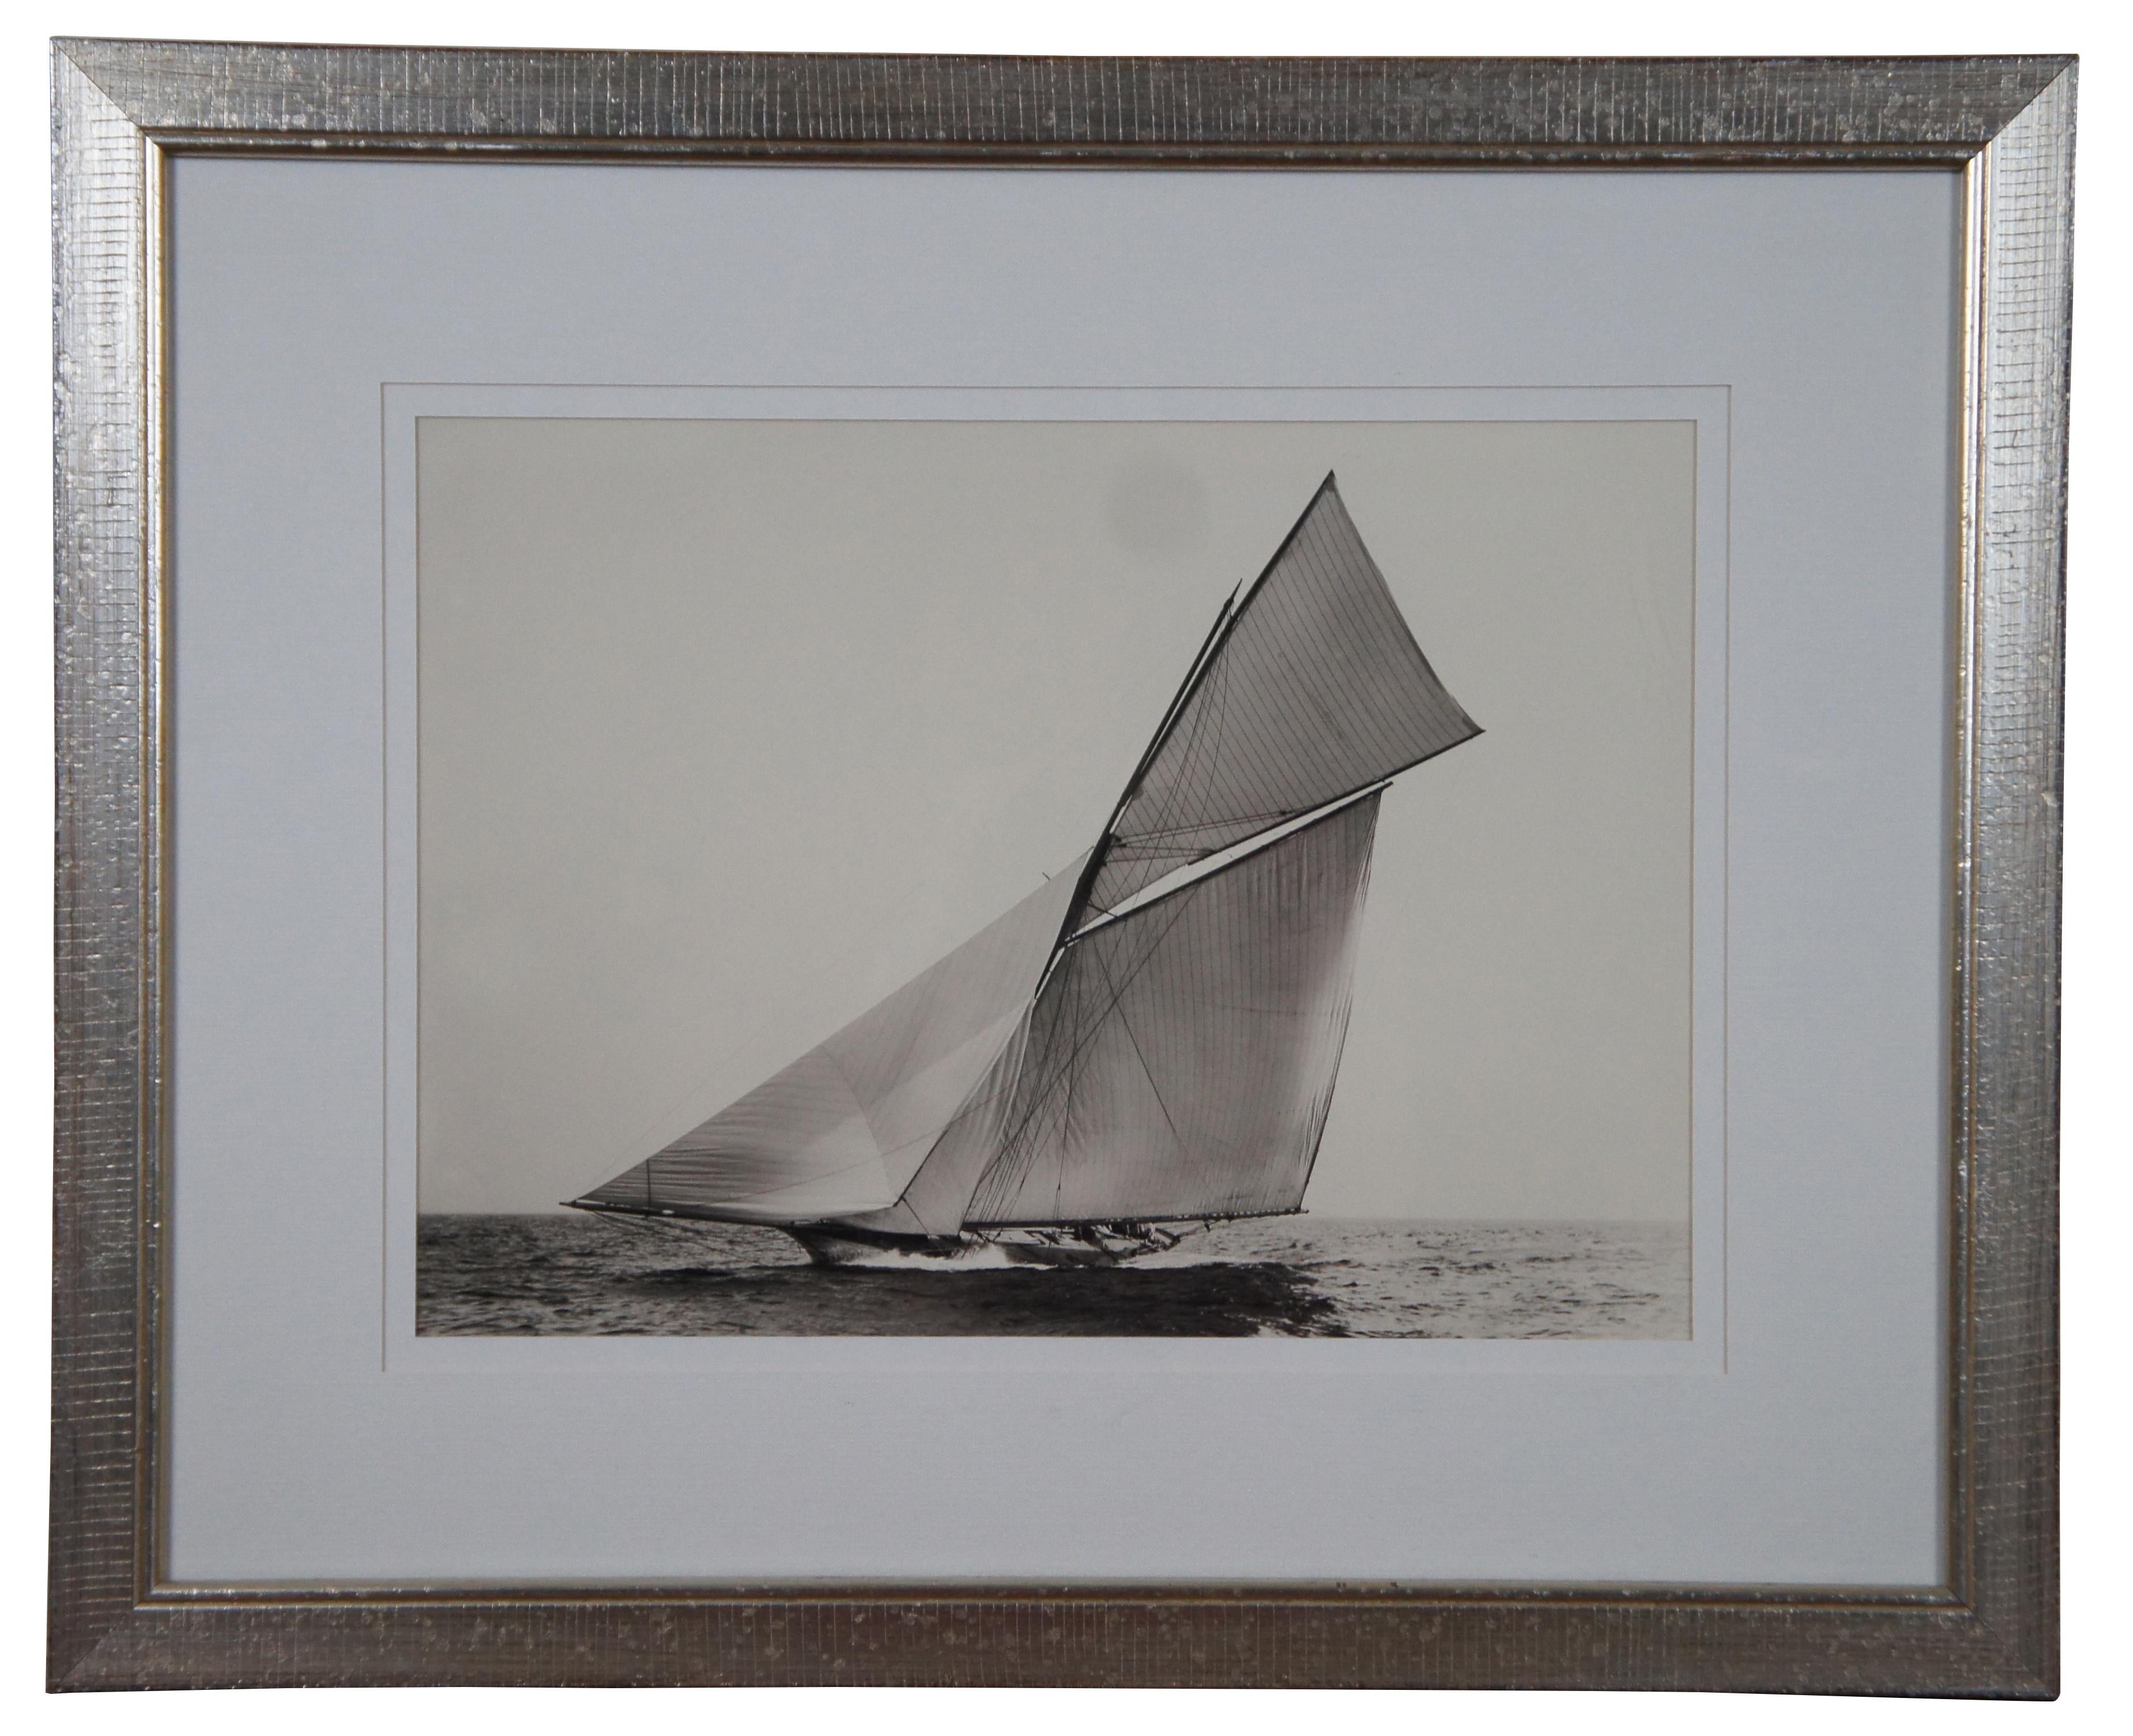 Two vintage black and white photographic prints – Regatta II and Regatta VI – by Frontgate from their nine part Regatta wall art series.“Captivating in their simplicity, our Regatta photo reproductions showcase majestic sailboats on the high seas.